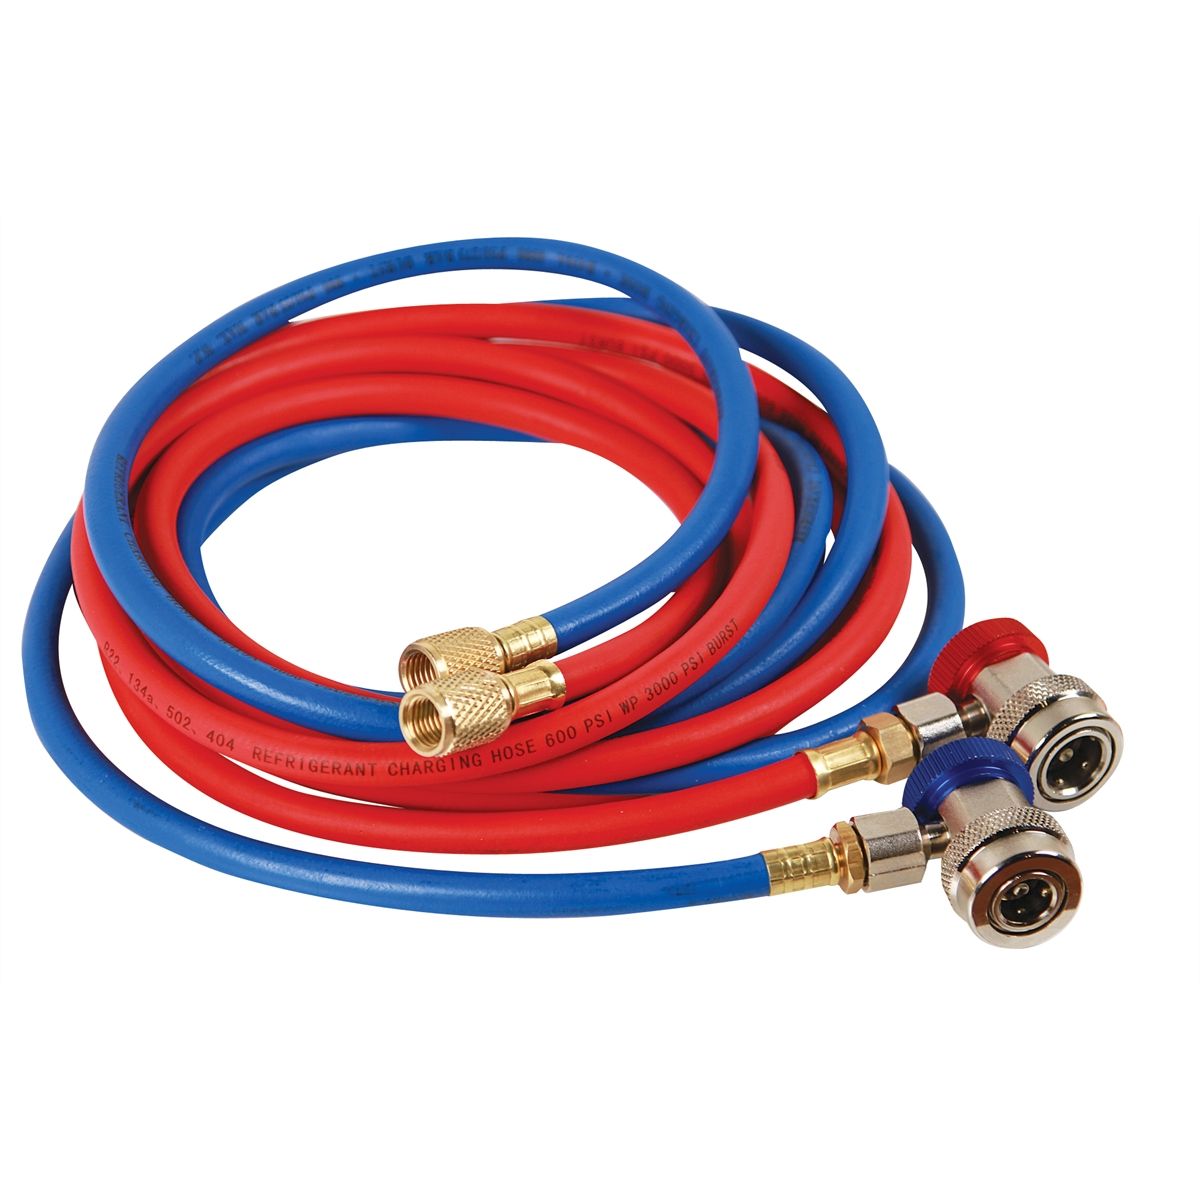 R134a Charging Hose Set w Manual Couplers 10 Ft Re...